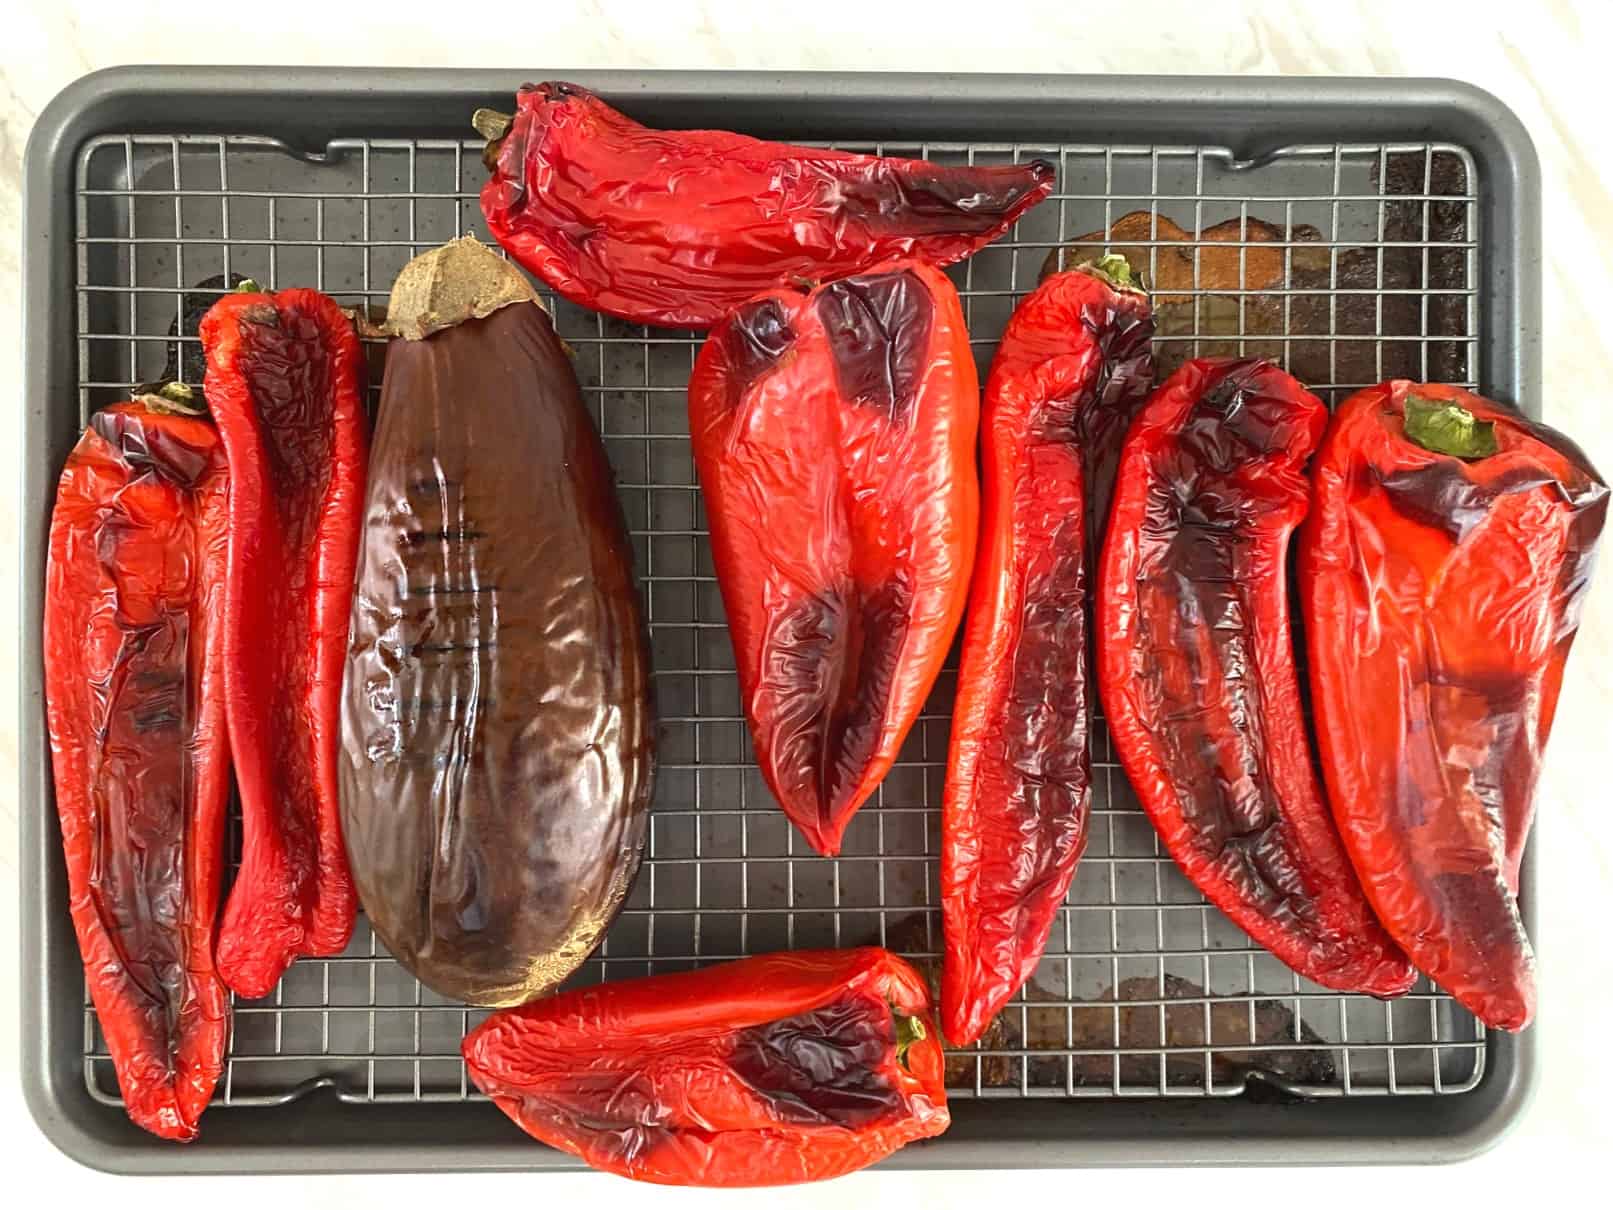 Roasted red peppers and eggplant on a baking tray that has a rack under the vegetables.